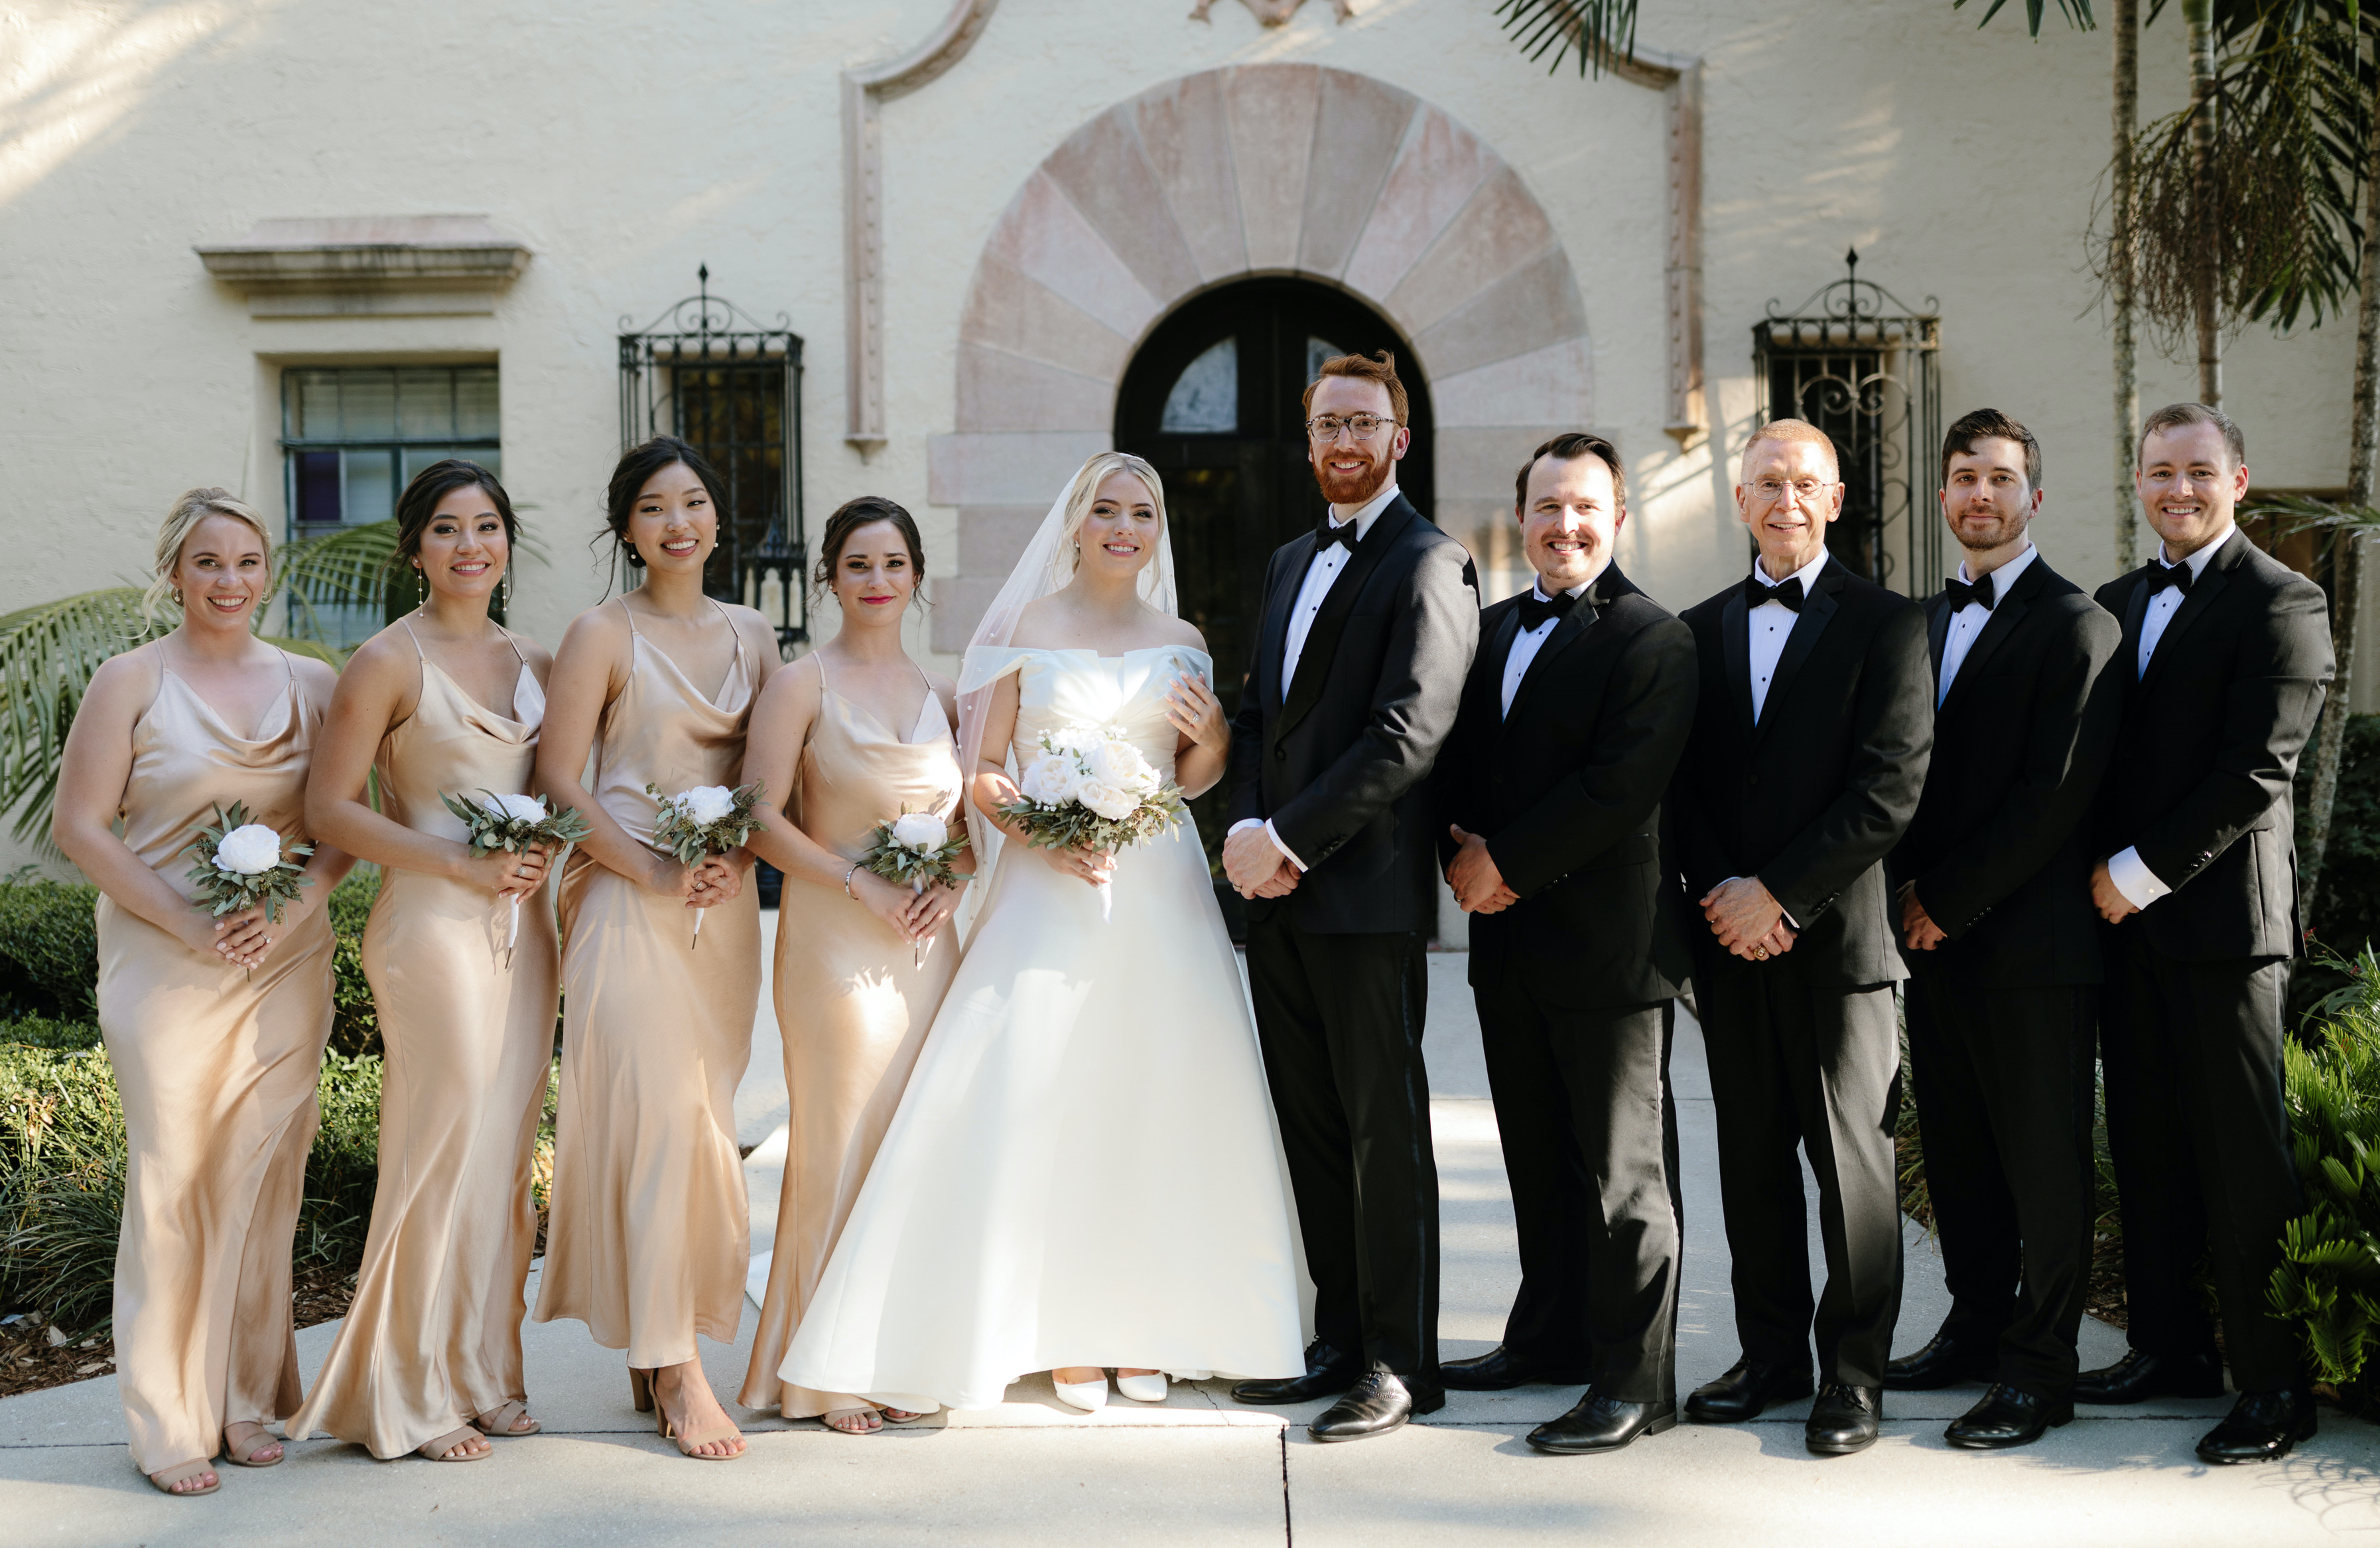 A bride and groom stand with their bridesmaids and groomsmen outside of their wedding venue in Sarasota, FL.